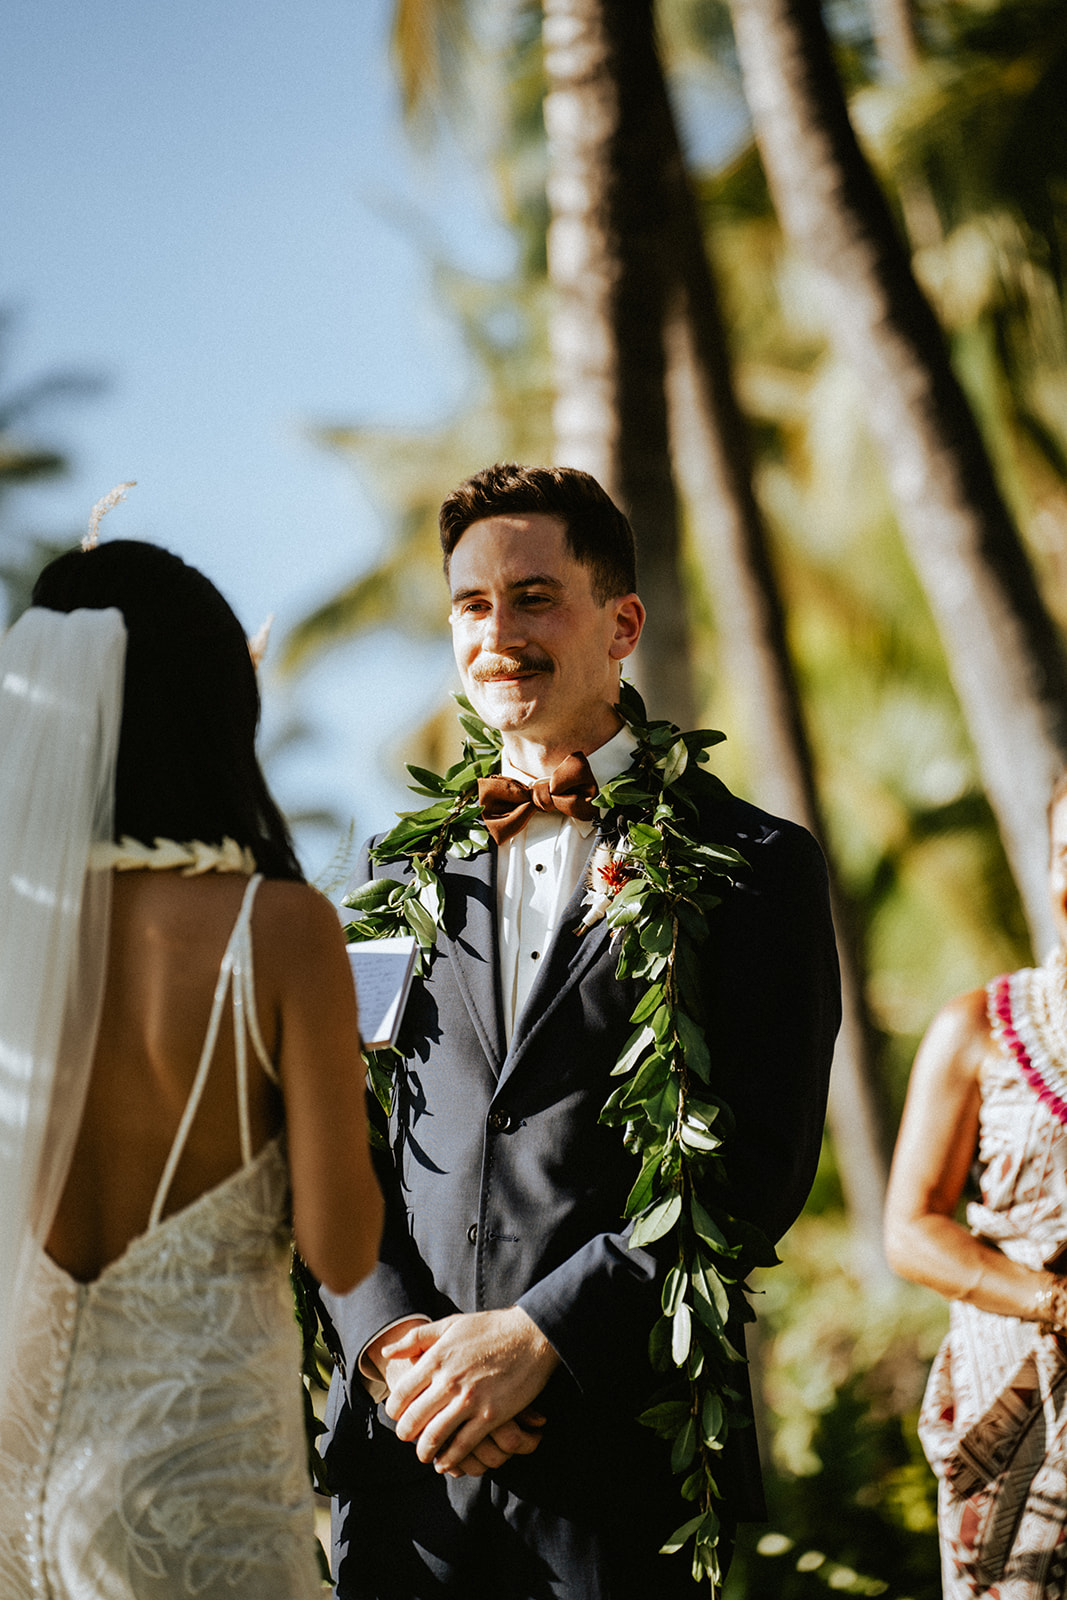 Bride and groom recite their vows at Lanikuhonua on a sunny day